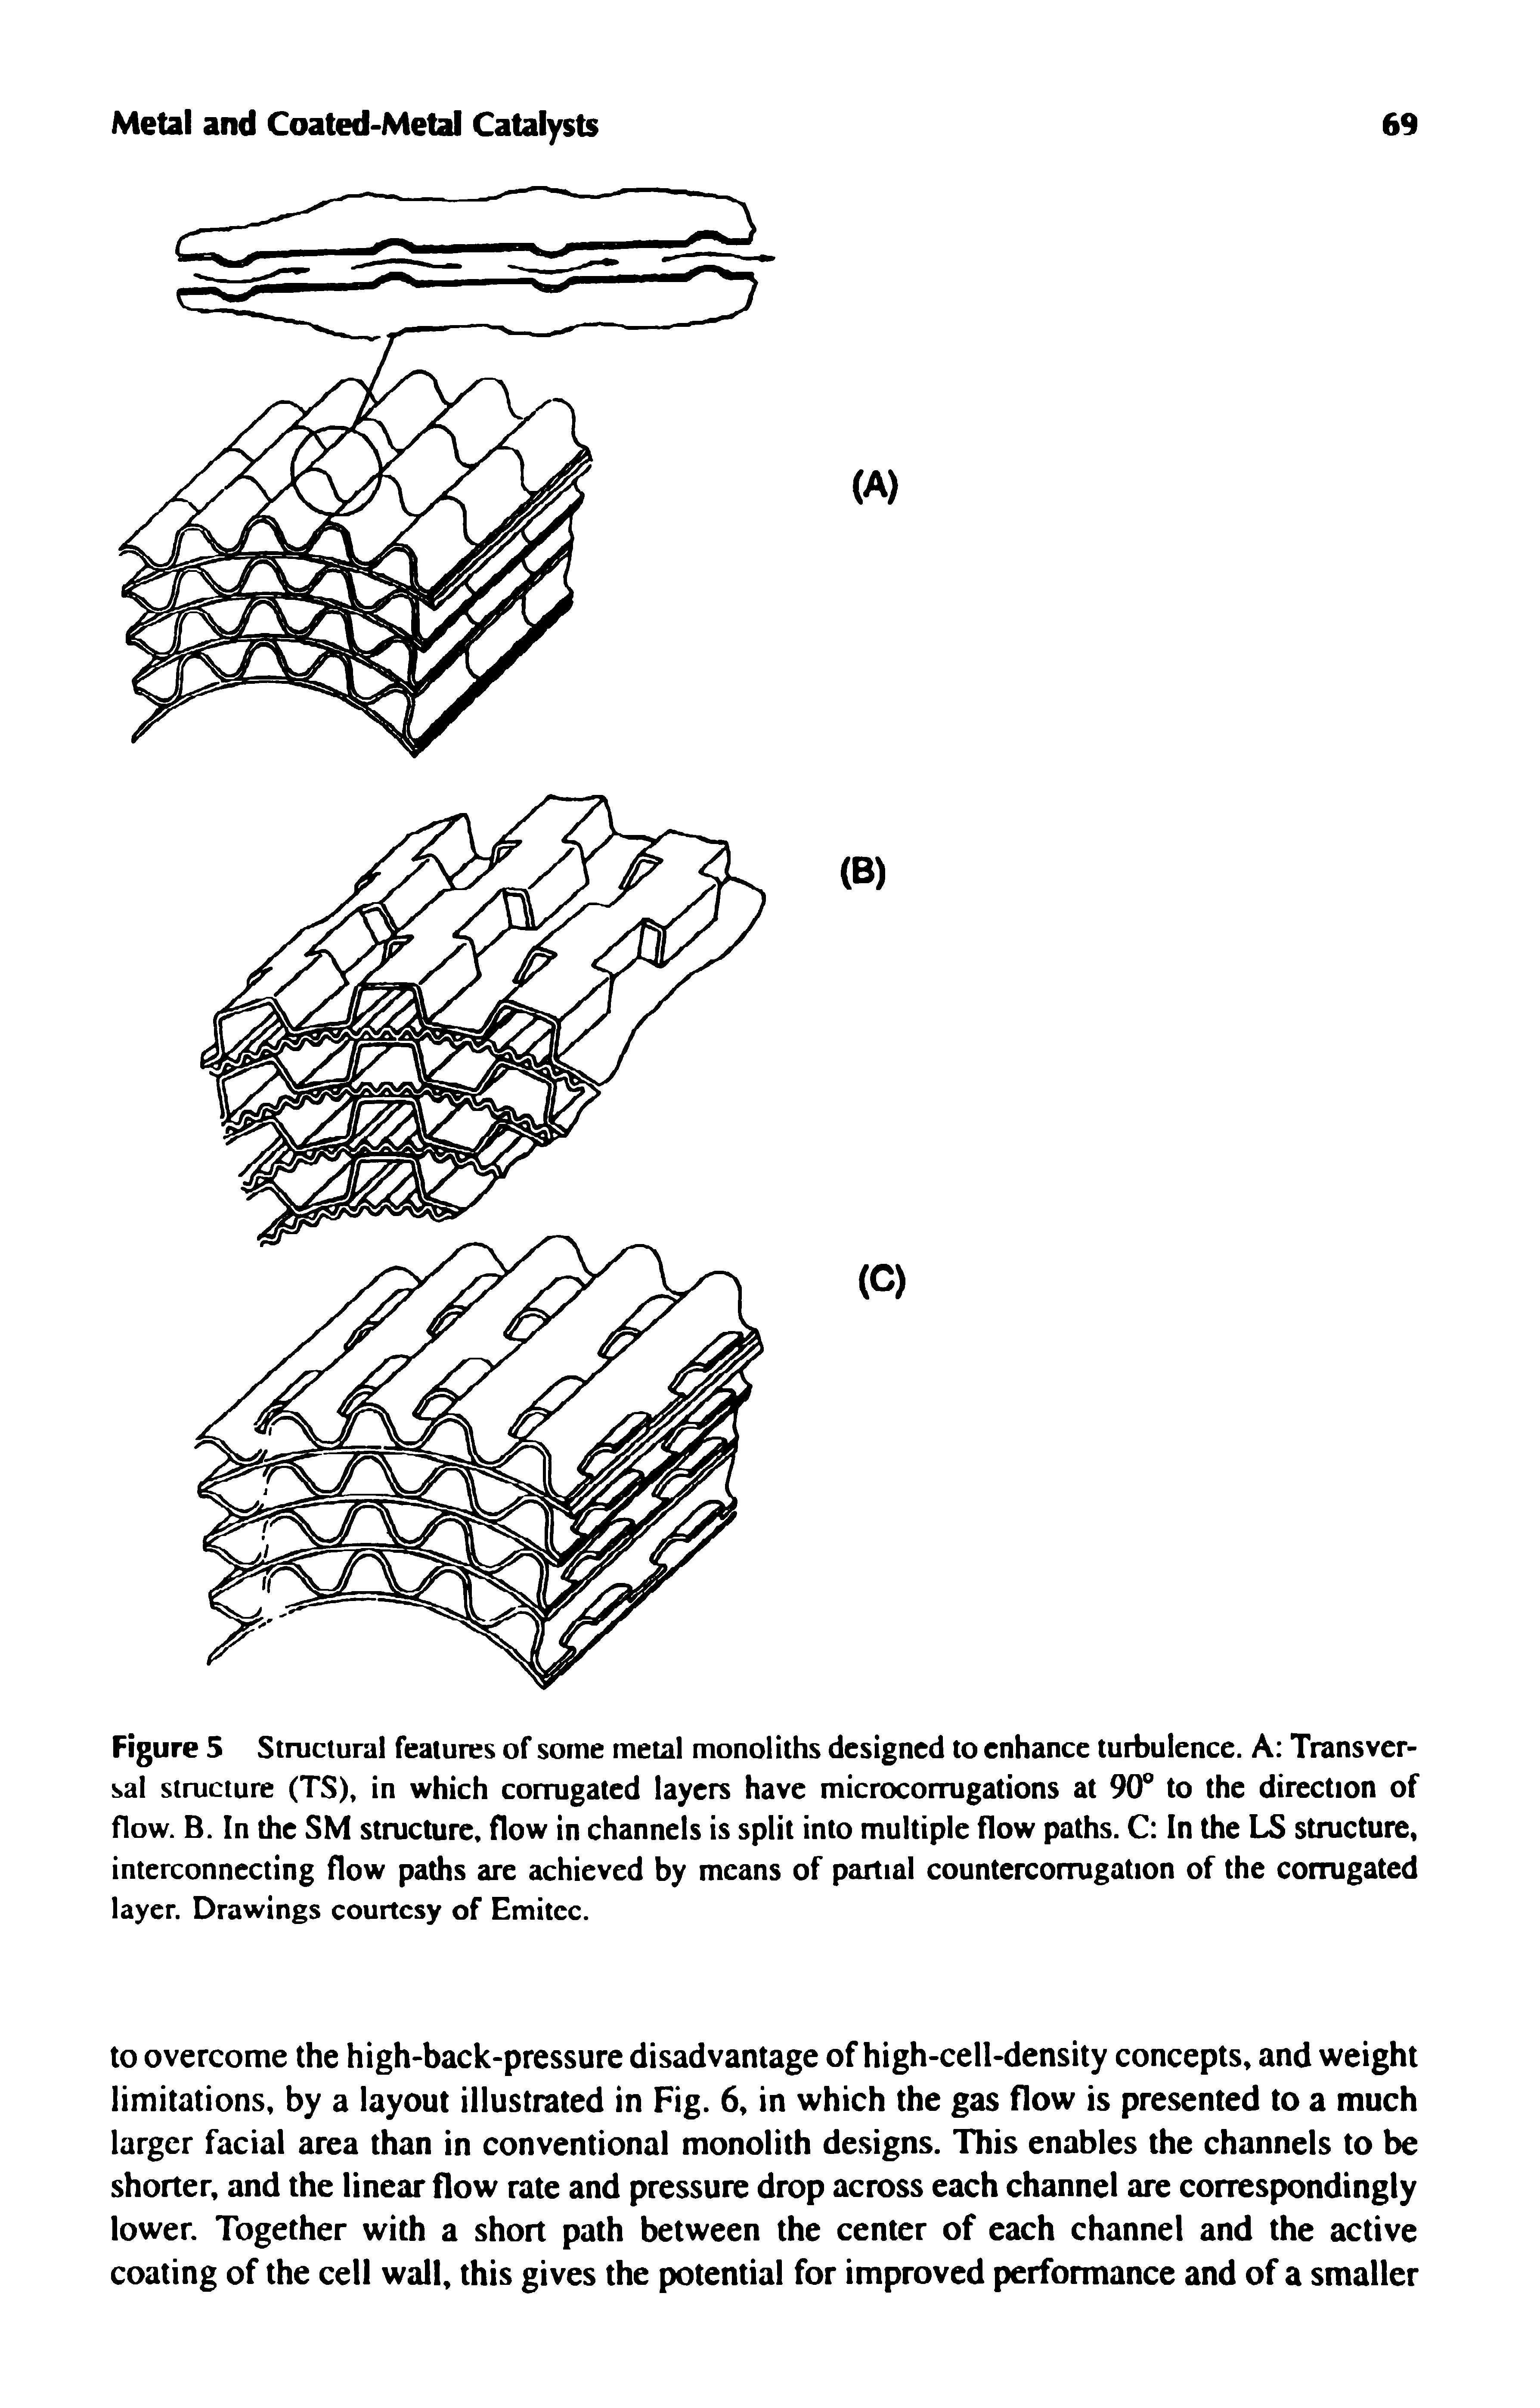 Figure 5 Structural features of some metal monoliths designed to enhance turbulence. A Transversal structure (TS) in which corrugated layers have microcomigations at 90 to the direction of flow. B. In the SM structure, flow in channels is split into multiple flow paths. C In the LS structure, interconnecting flow paths are achieved by means of partial countercorrugation of the corrugated layer. Drawings courtesy of Emitcc.